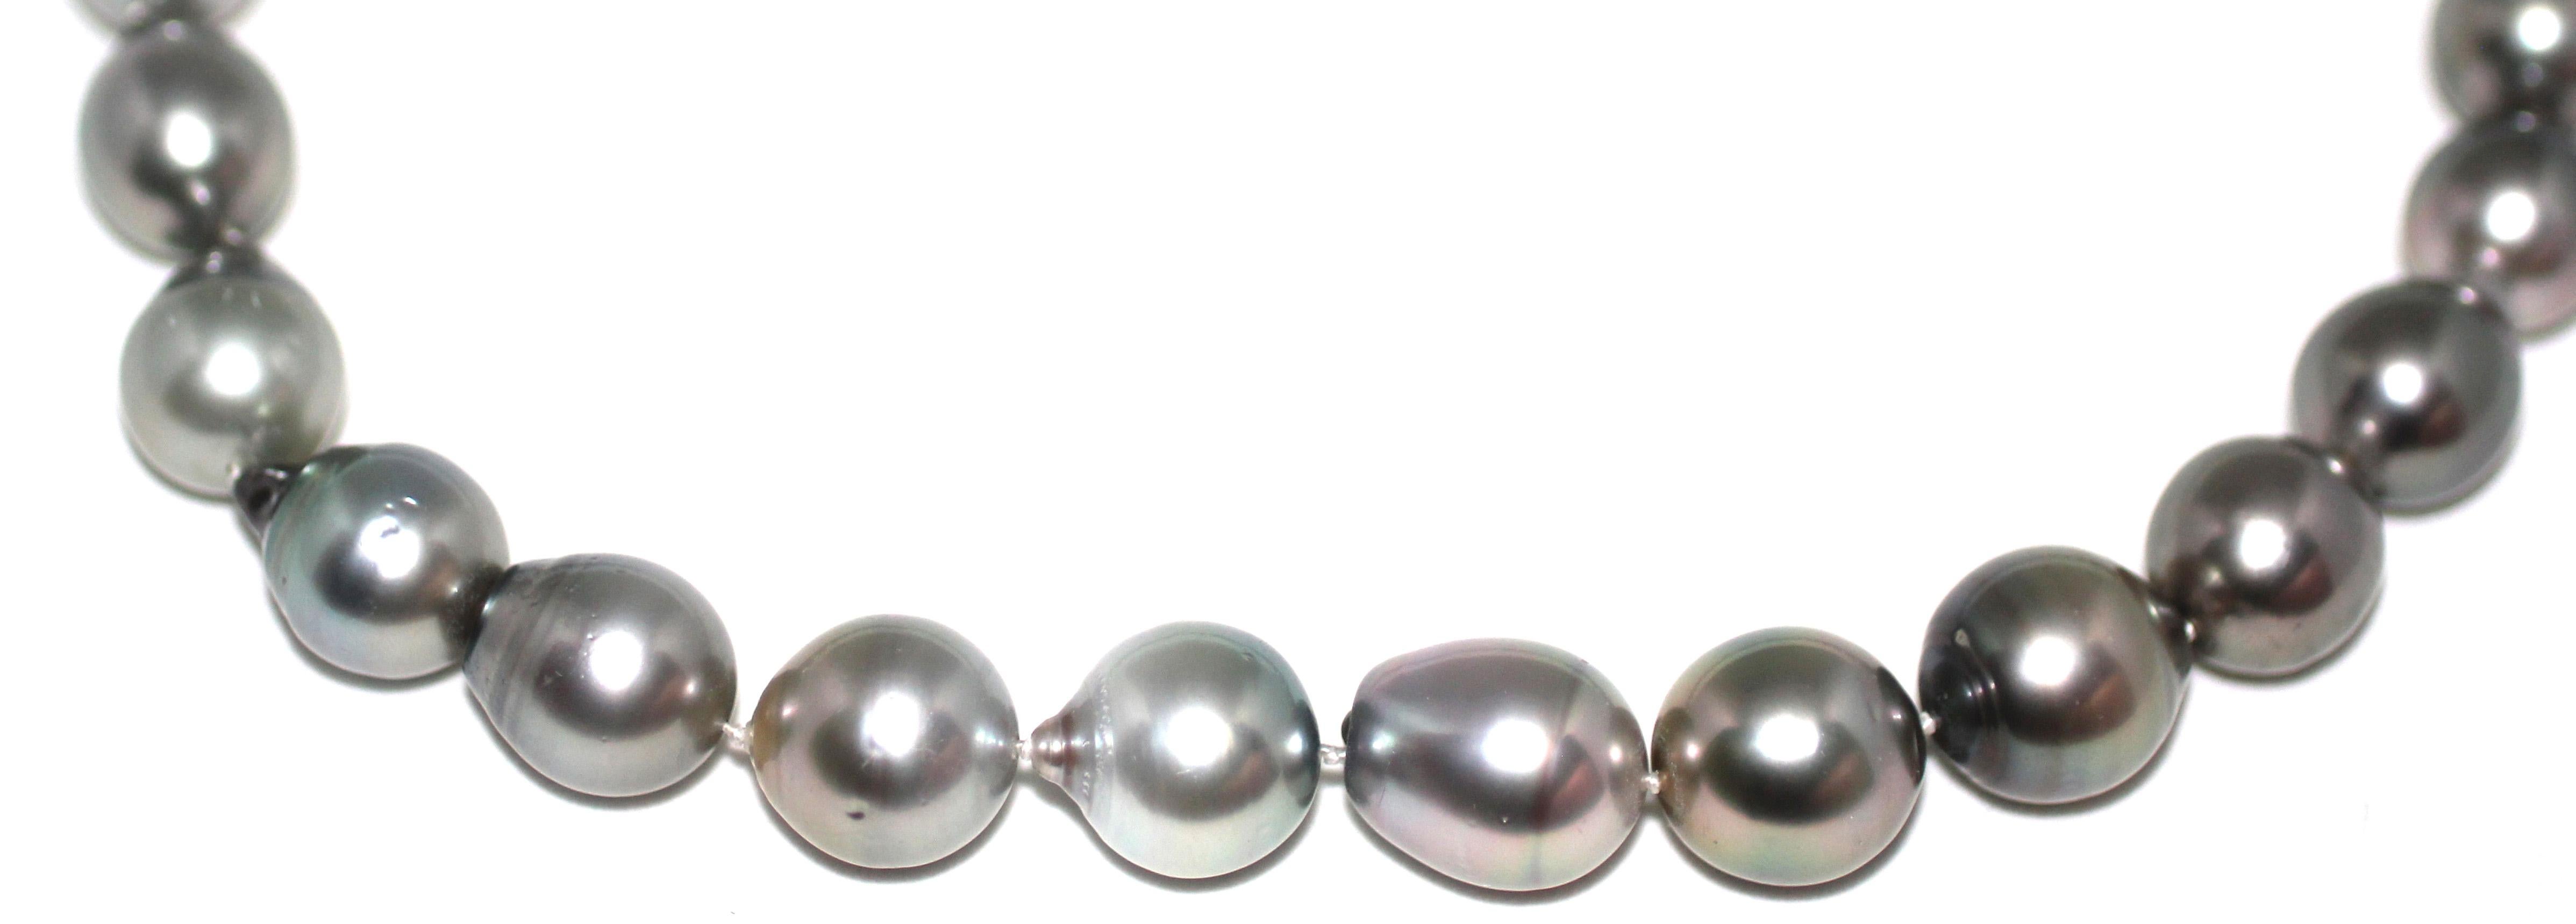 Hakimoto By Jewel Of Ocean
Manufacture Suggested Retail Price $20,000
Tahitian South Sea Baroque Pearl Necklace
18K Diamond White Gold Clasp
12x15mm
18